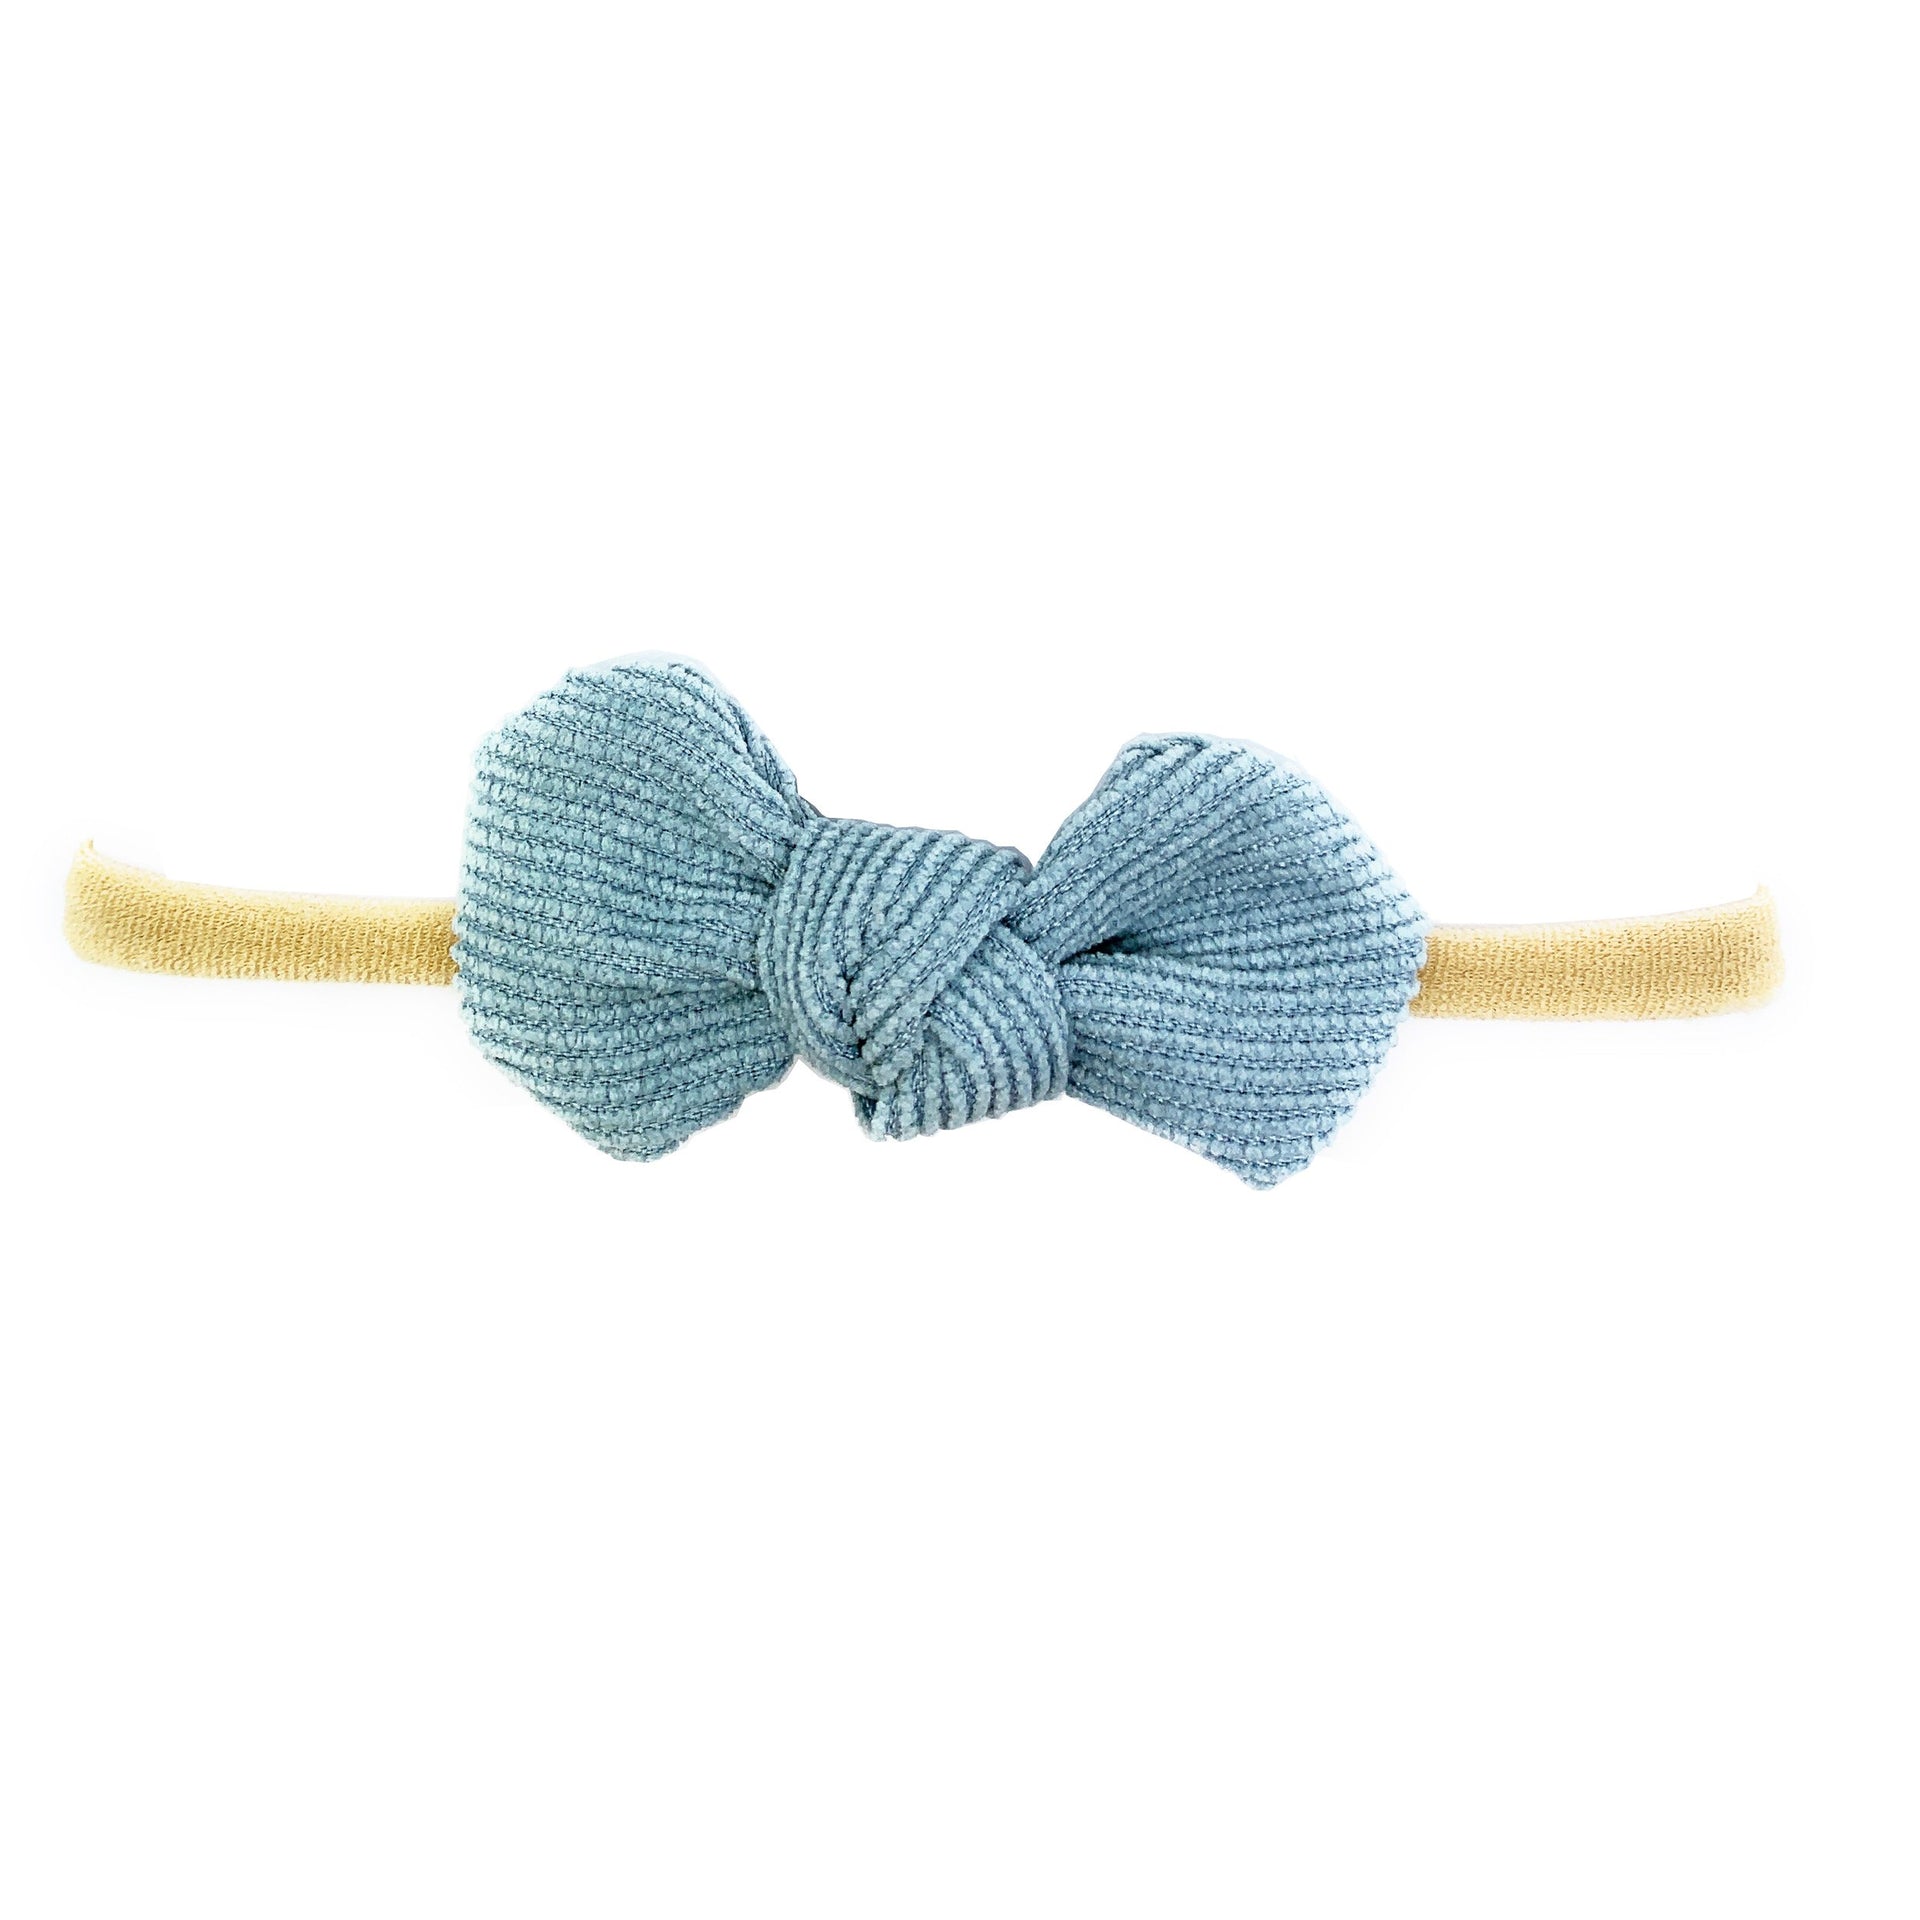 Cordelia Corduroy Knot Bow Headband For Babies and Toddlers Baby Wisp